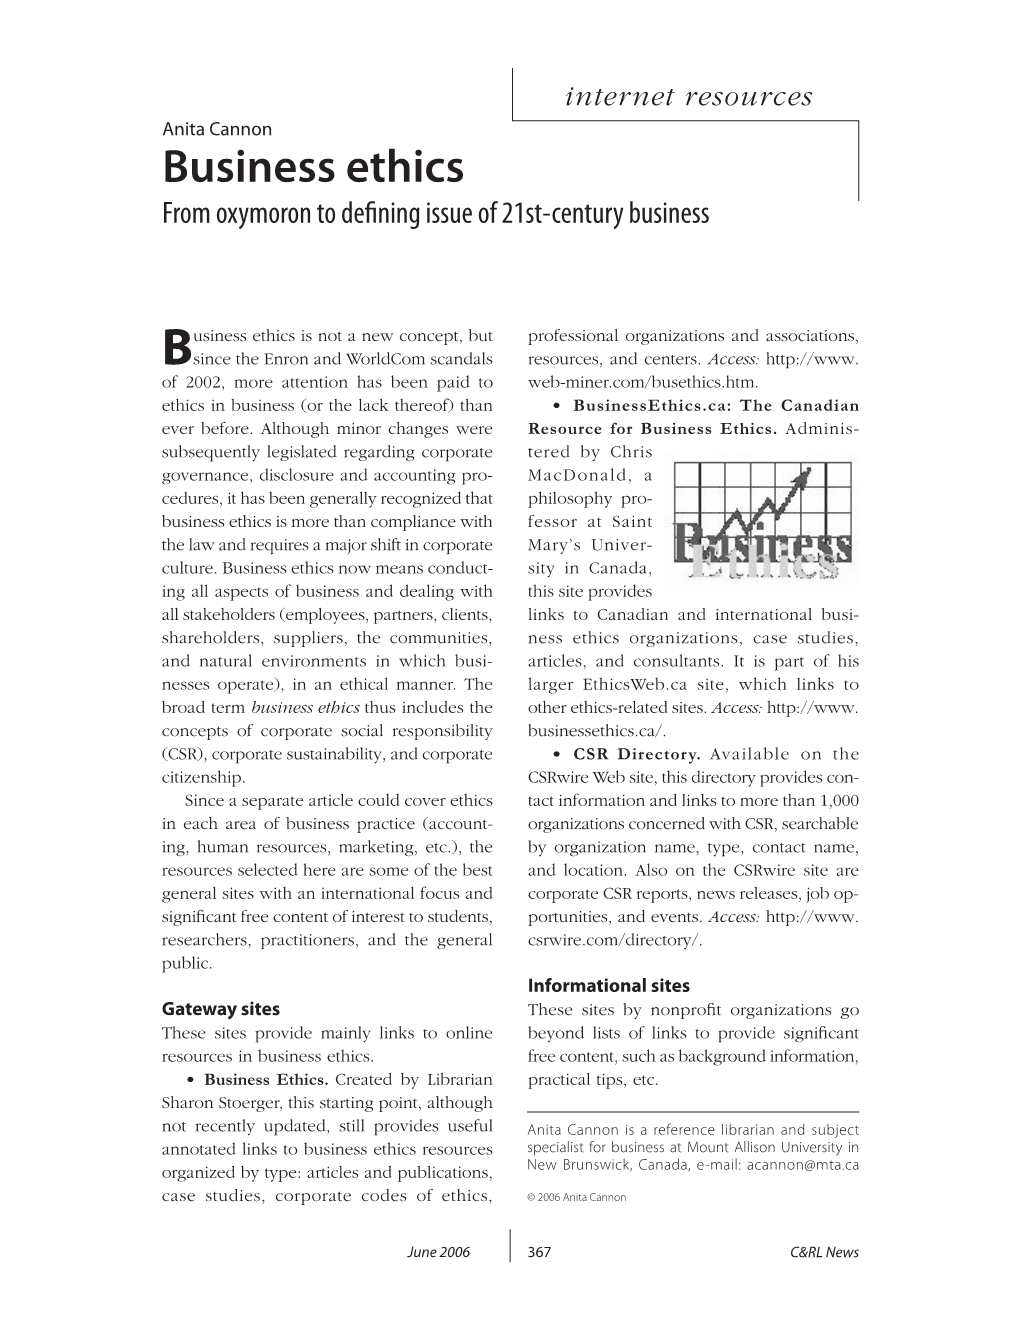 Business Ethics from Oxymoron to Deﬁning Issue of 21St-Century Business